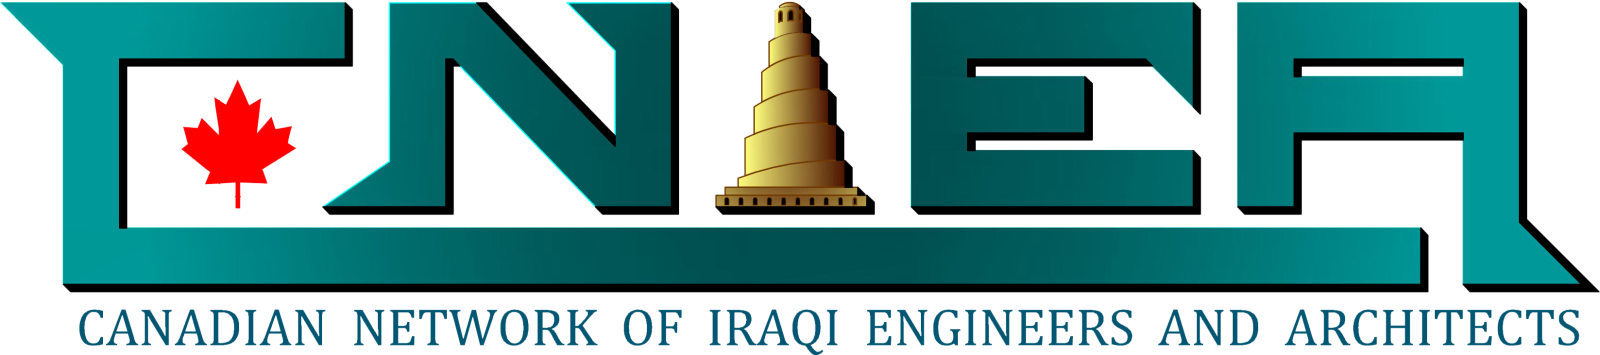 Canadian Network of Iraqi Engineers and Architects